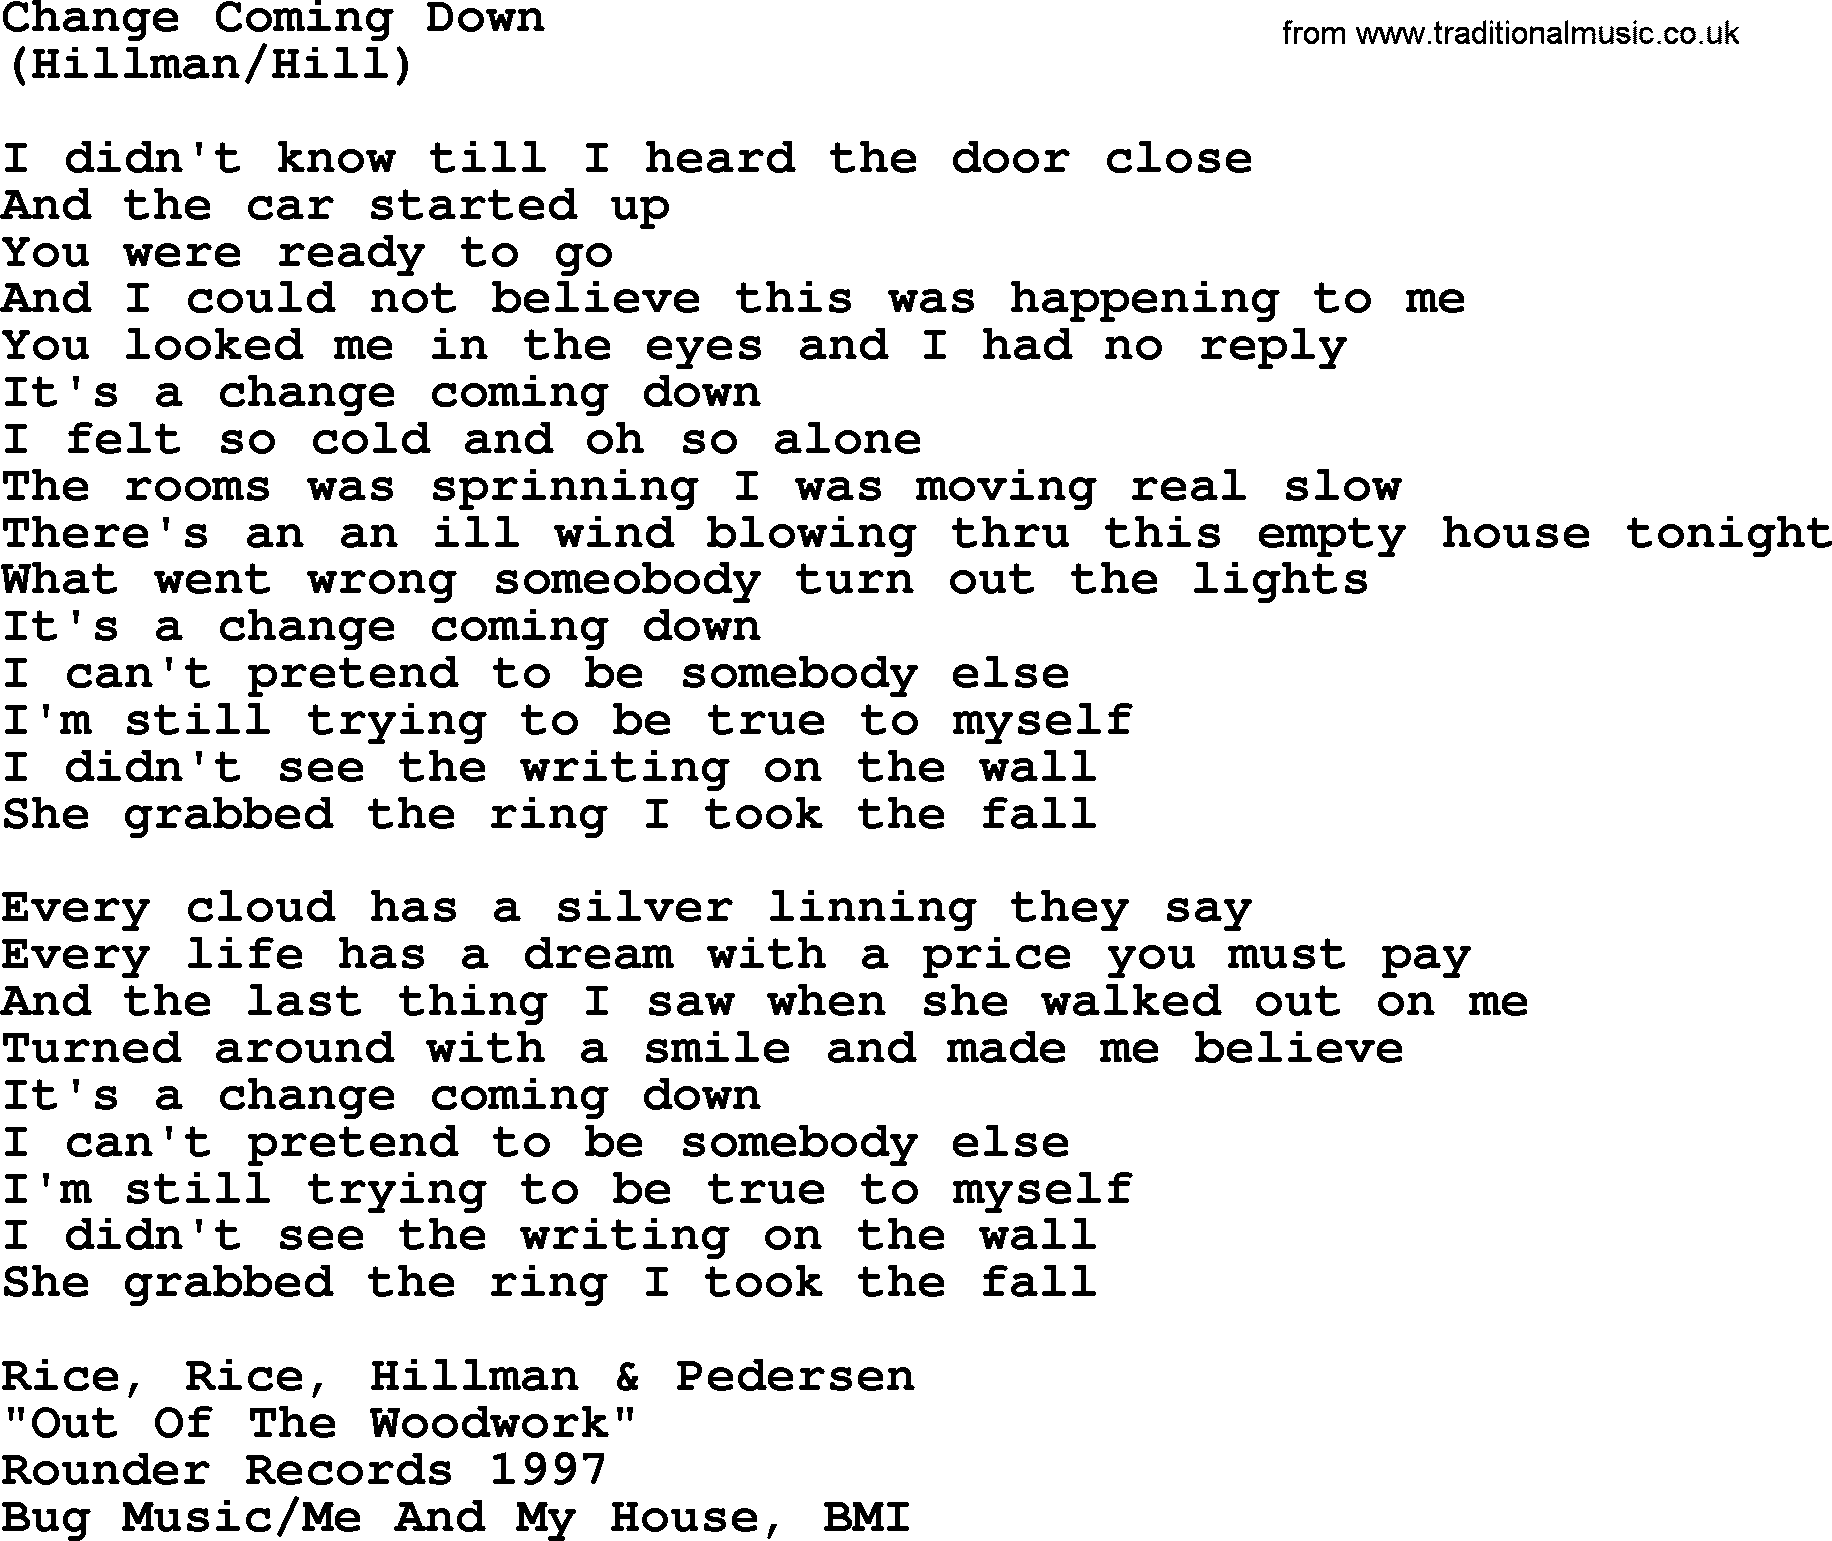 The Byrds song Change Coming Down, lyrics